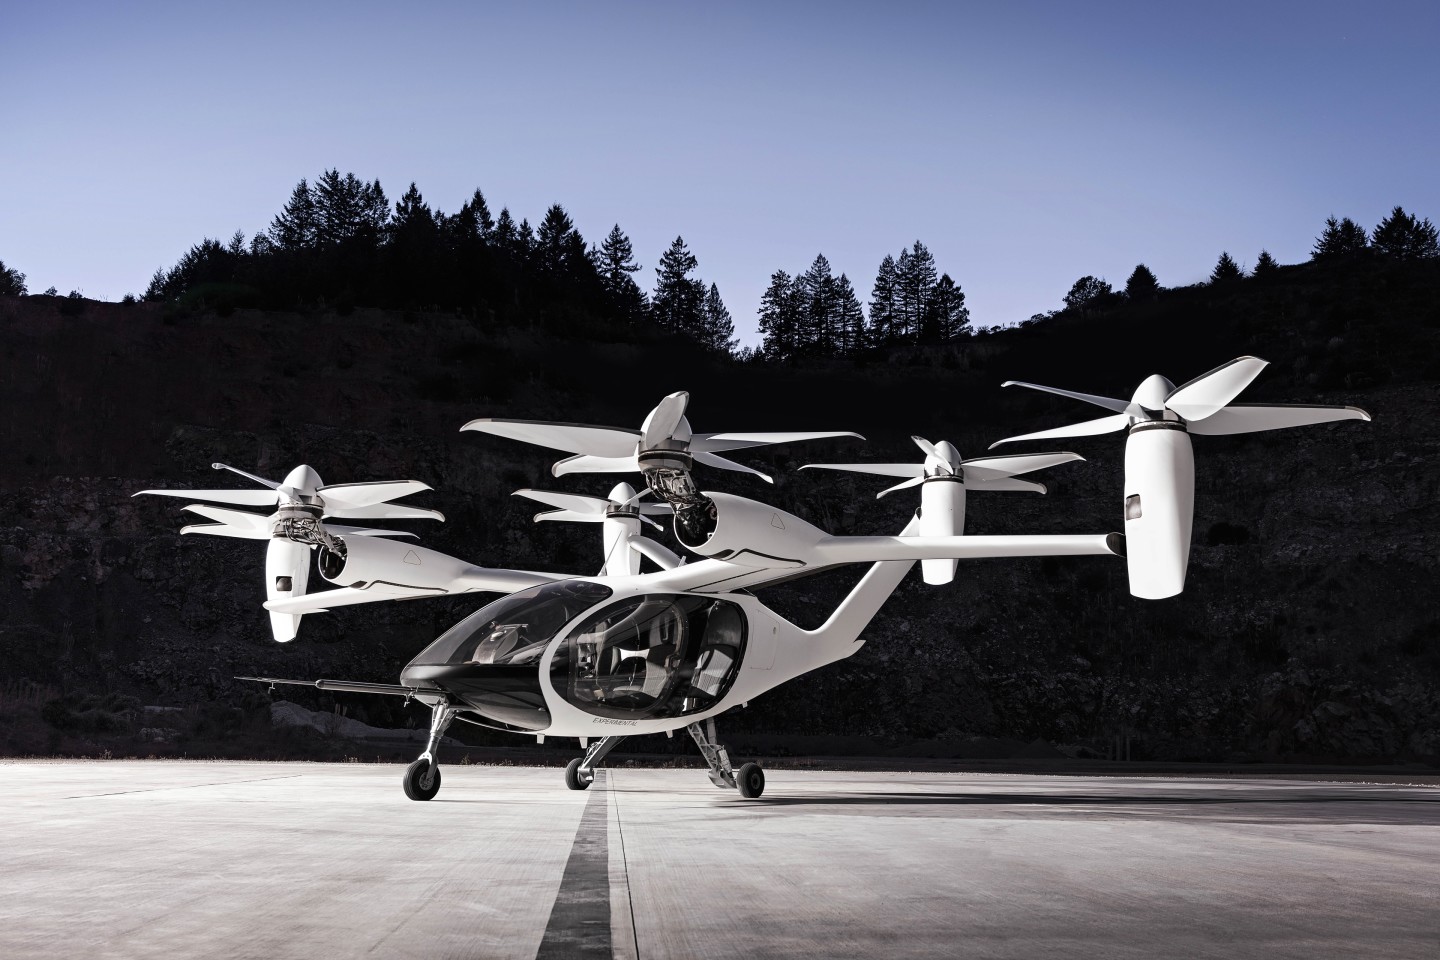 Joby Aviation has built and flight-tested its five-seat, six-rotor eVTOL air taxi